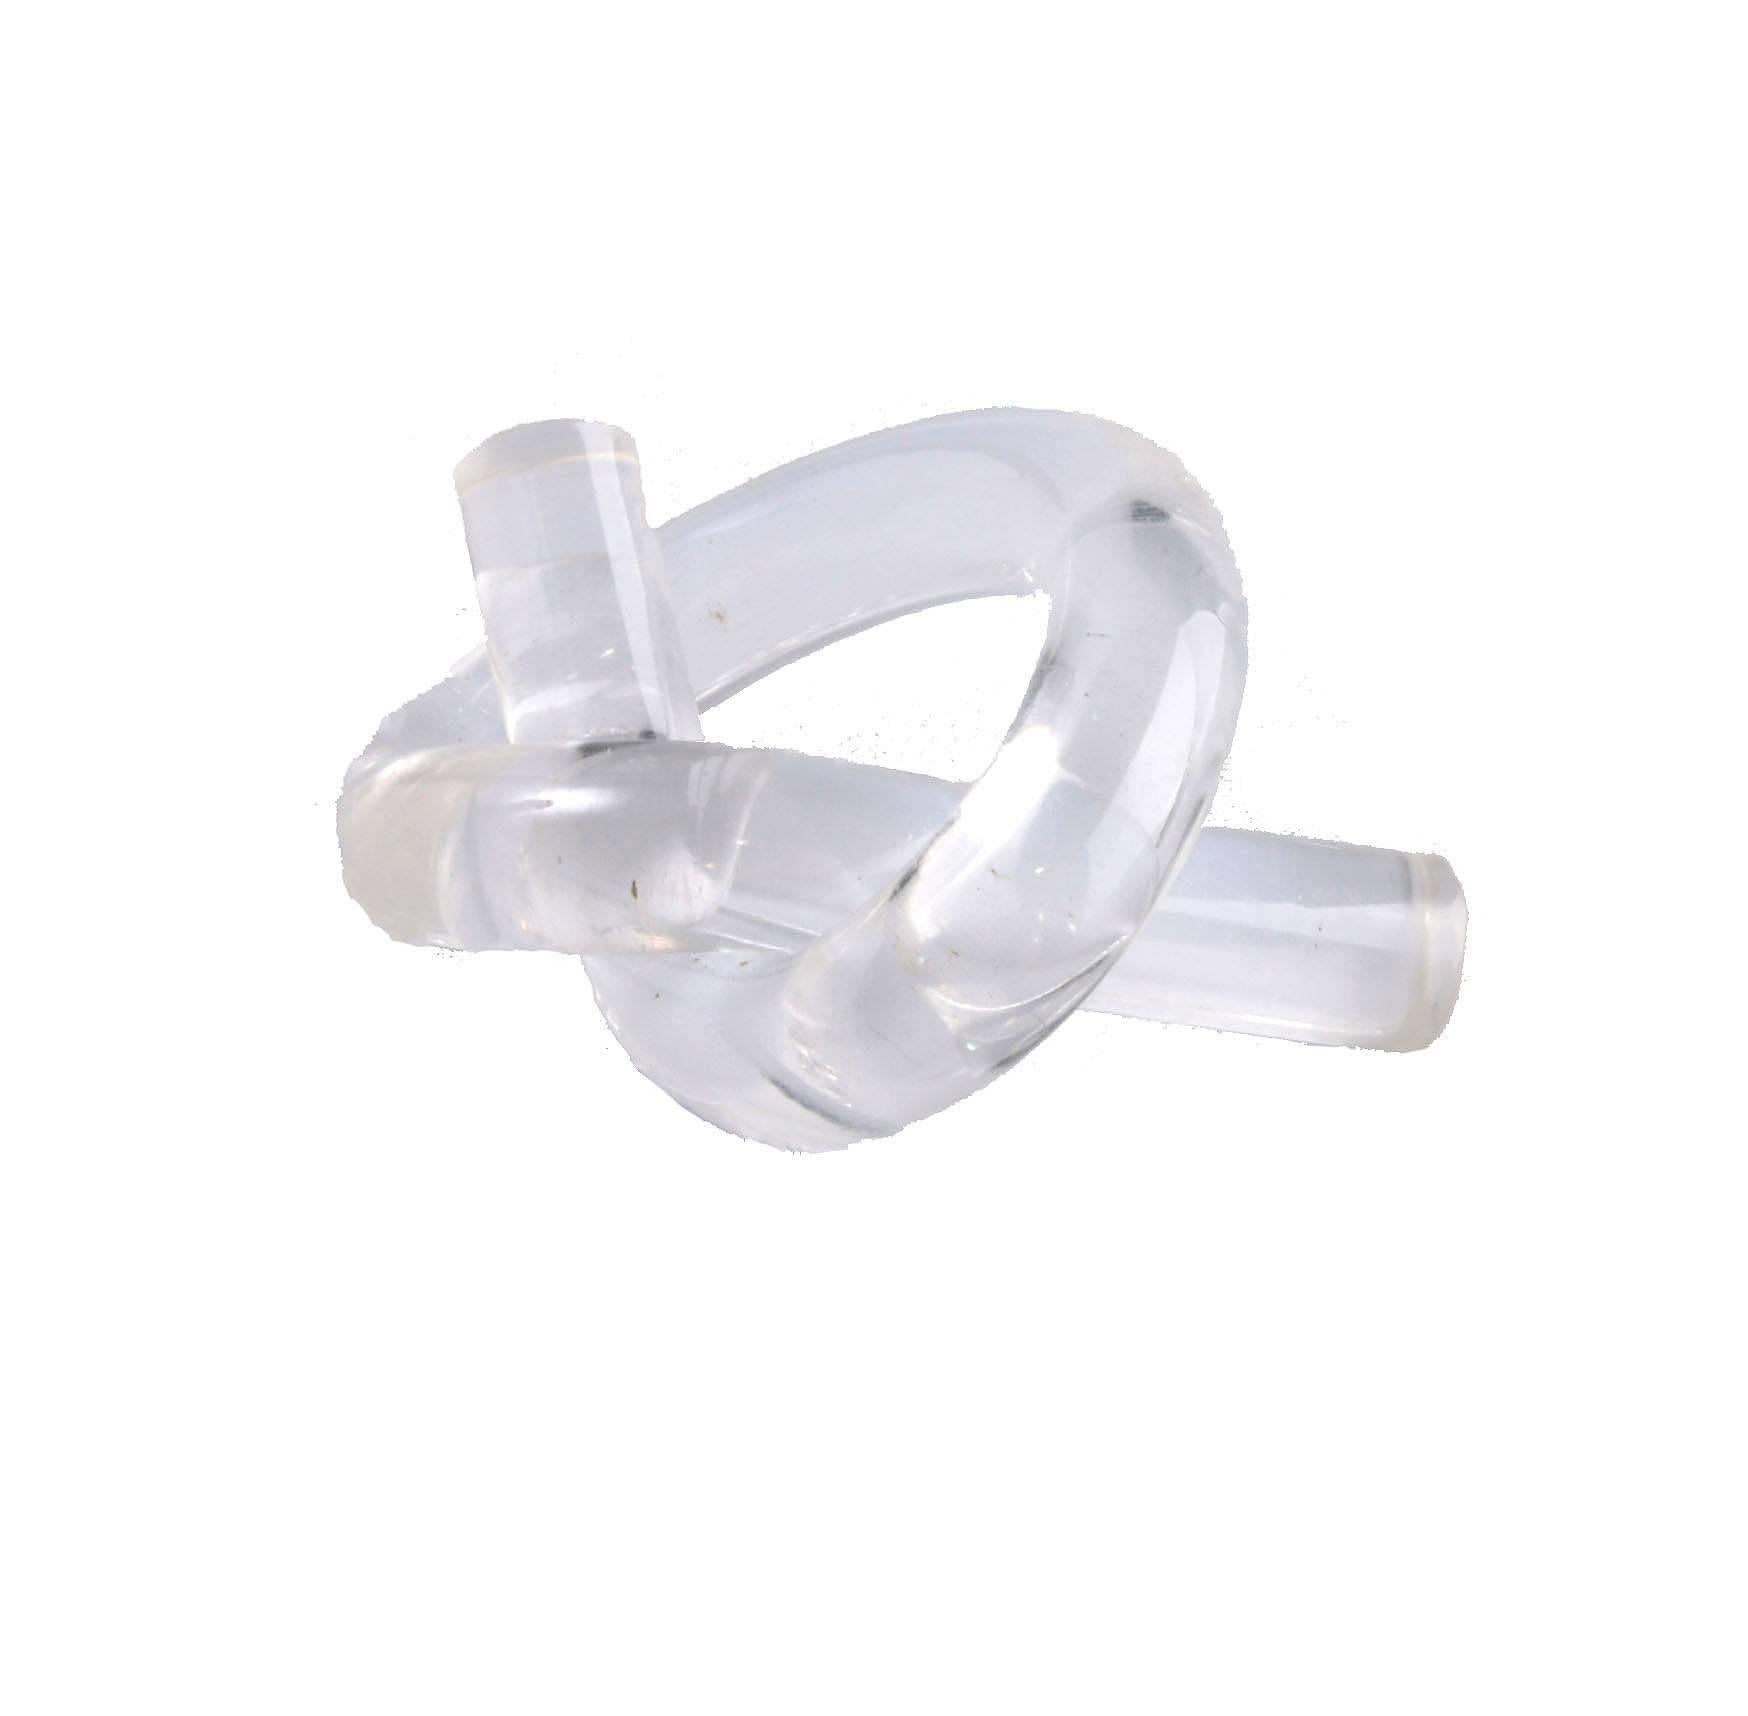 Hand-Crafted Dorothy Thorpe Lucite Napkin Rings in Pretzel Shape